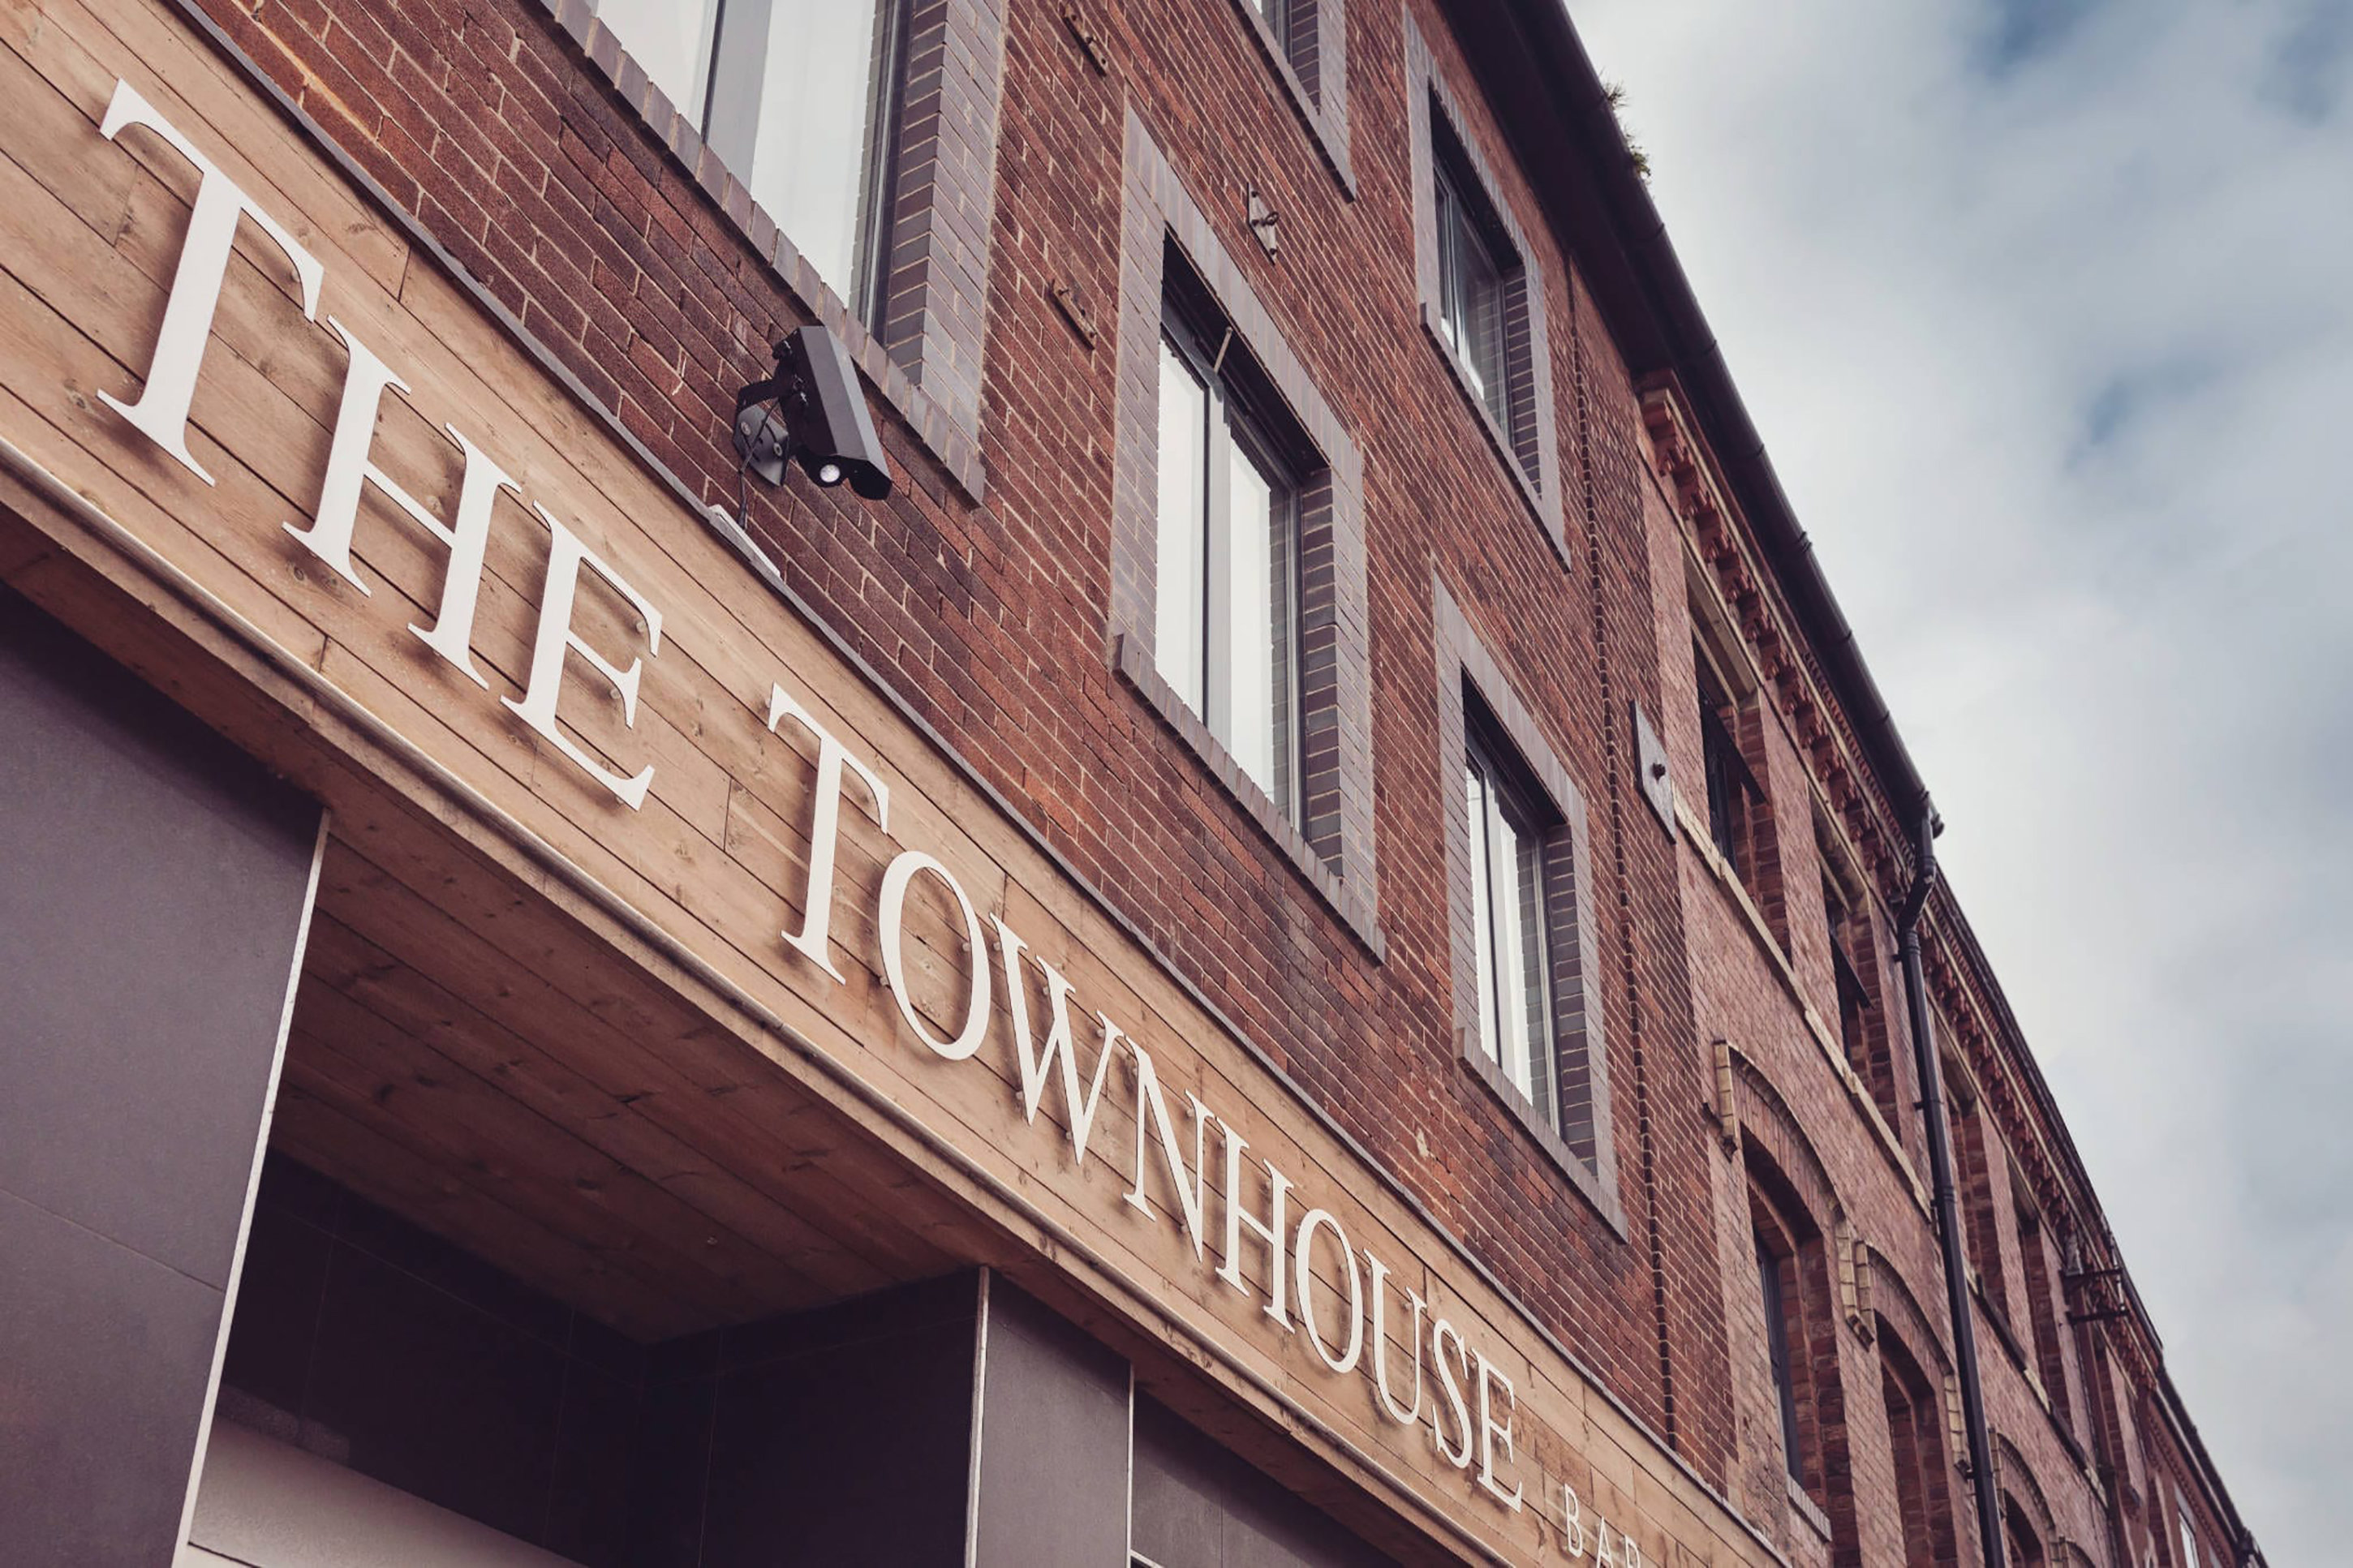 The Townhouse.211 image